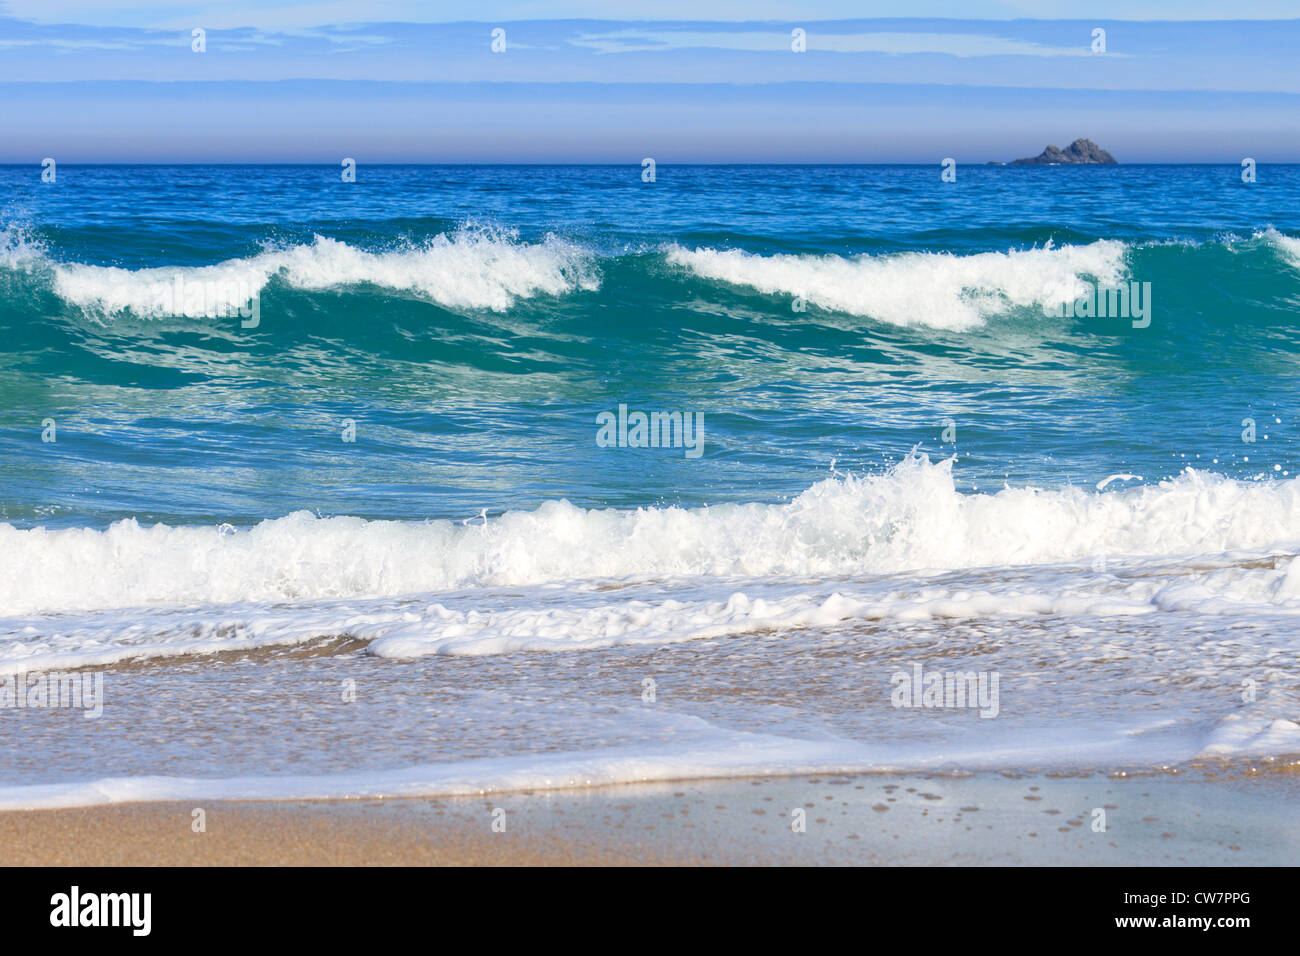 Waves crashing on the beach at Whitesands bay in Cornwall with The Brisons on the horizon Stock Photo